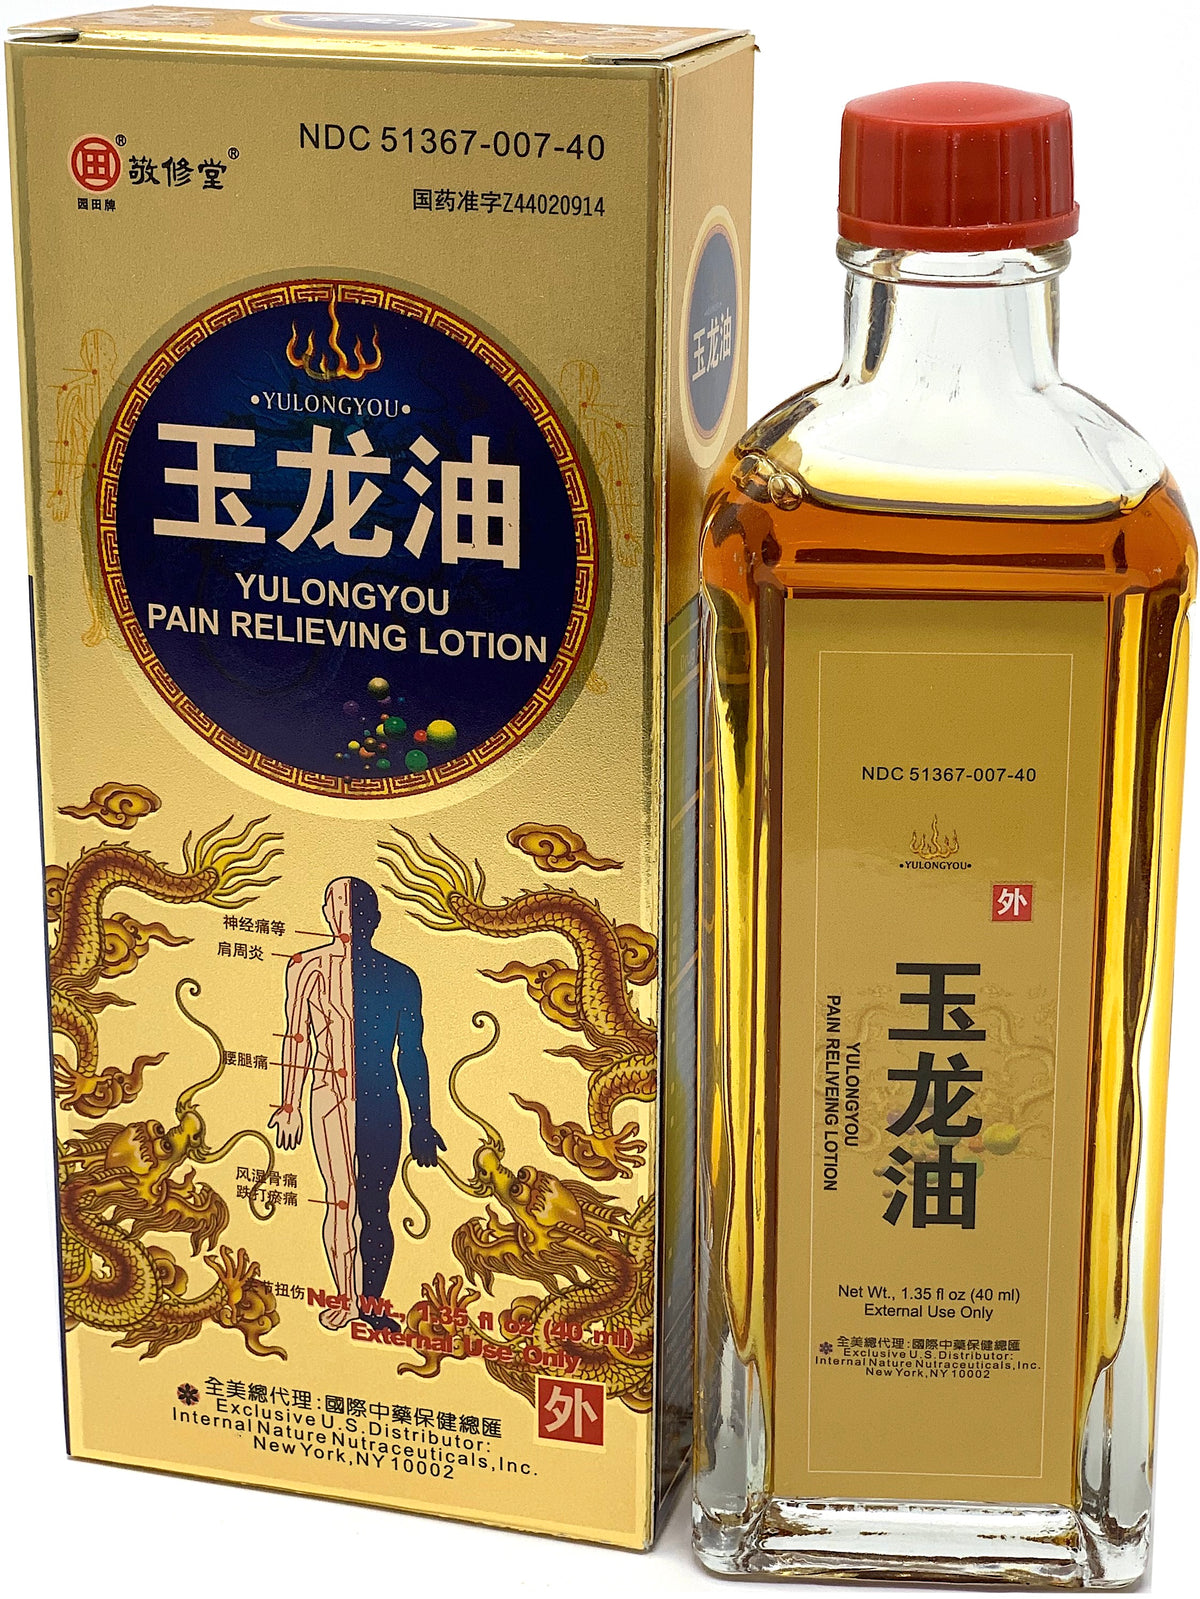 Pain Relieving Lotion (Yu Long You)